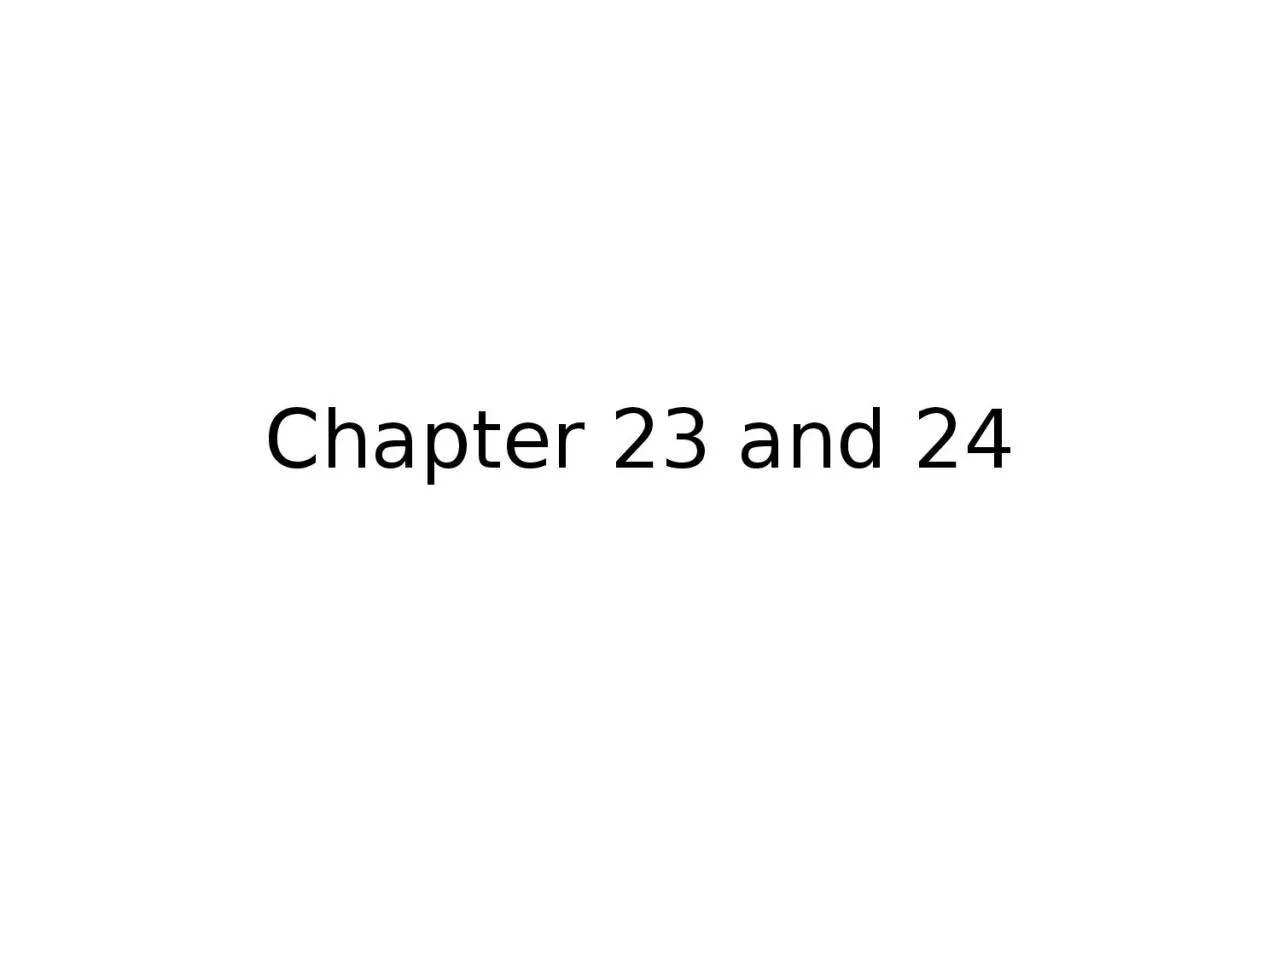 Chapter 23 and 24 Evolution on smallest scale